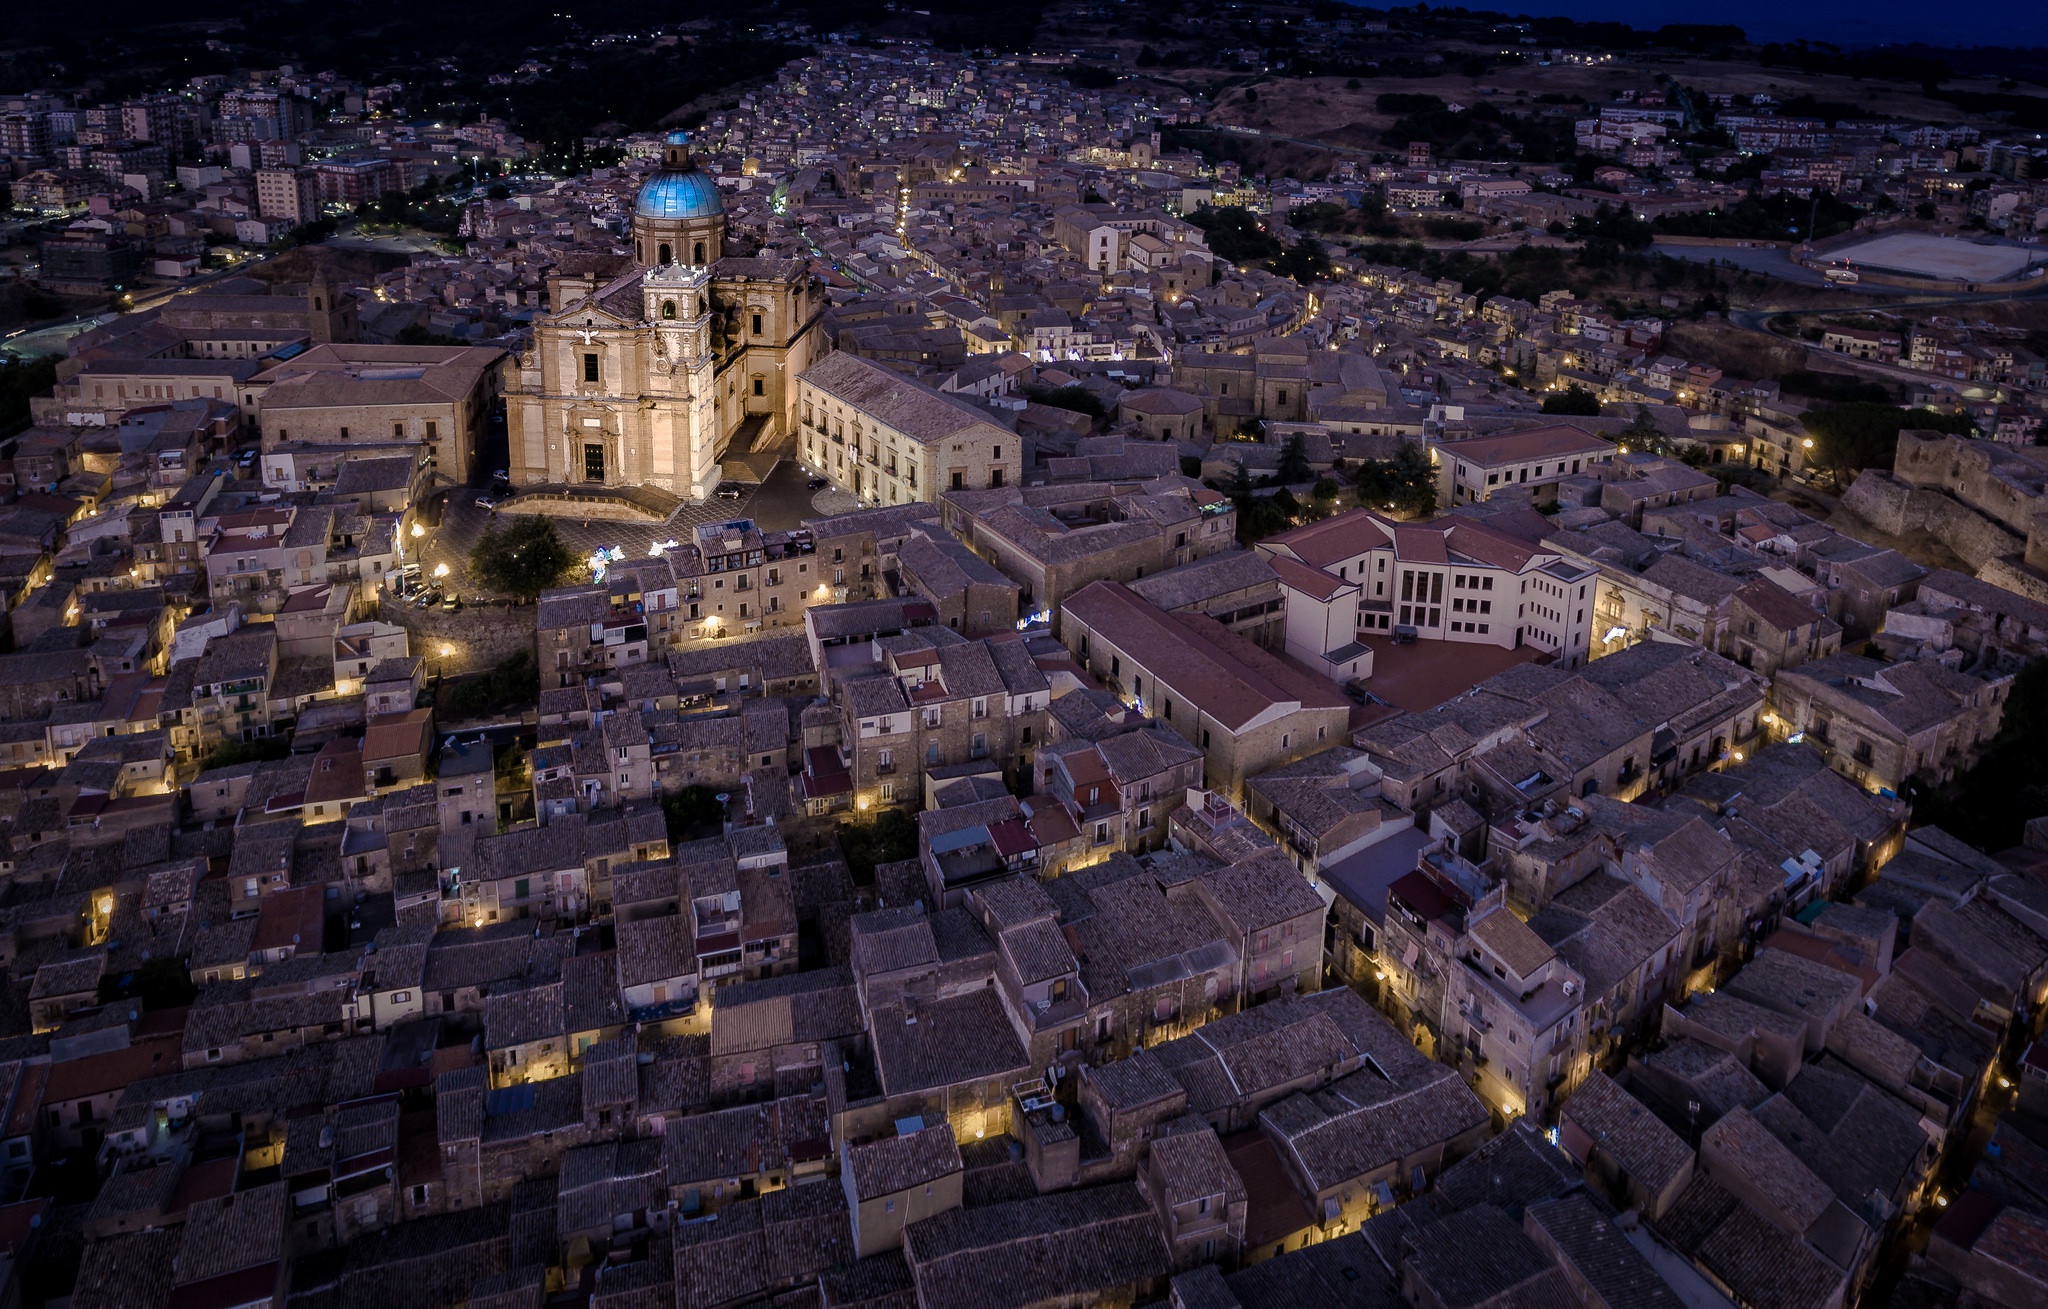 General 2048x1309 town aerial view Sicily Italy cathedral